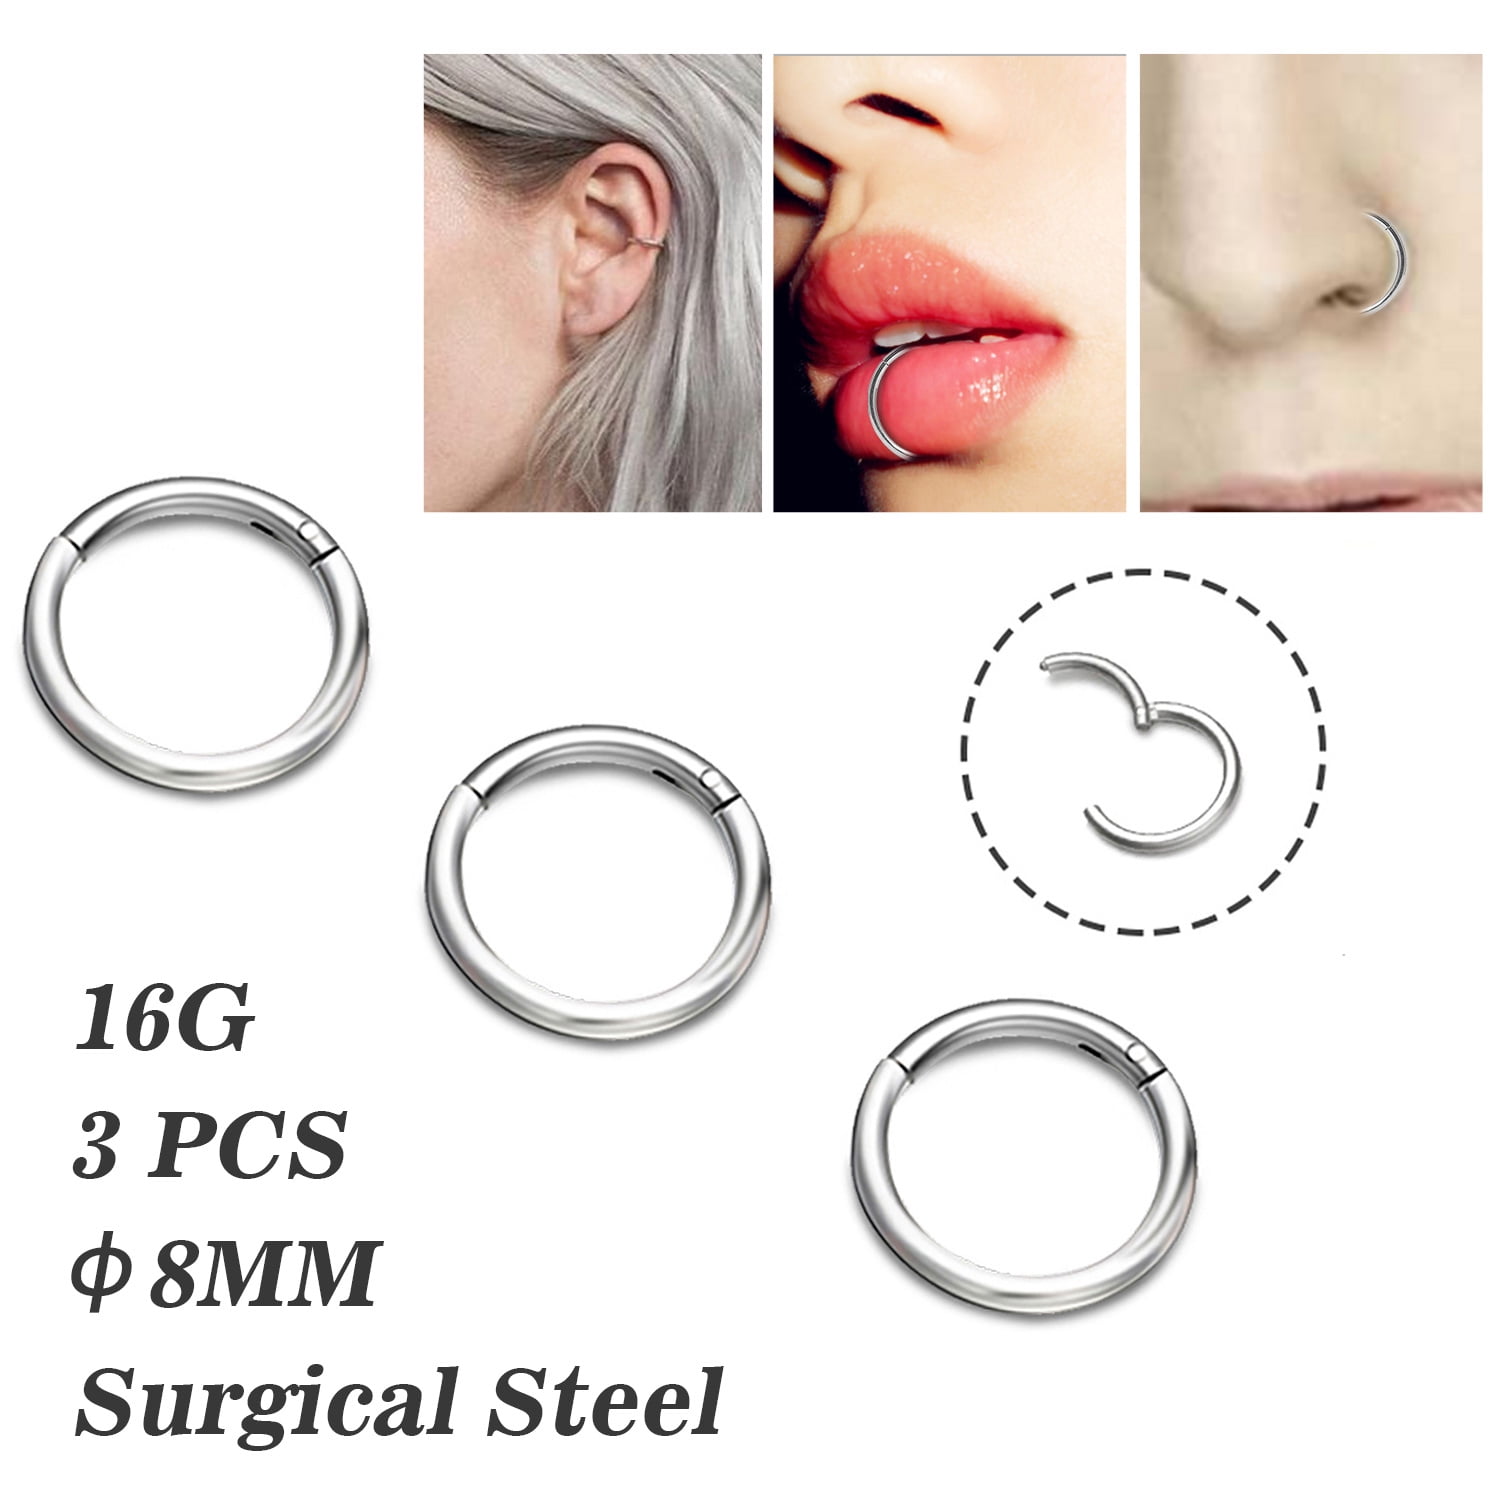 FORYOU FASHION Surgical Steel 16G Seamless Septum Clicker Ring Lip Helix Tragus Cartilage Earrings Nose Rings Pirecing 8mm 